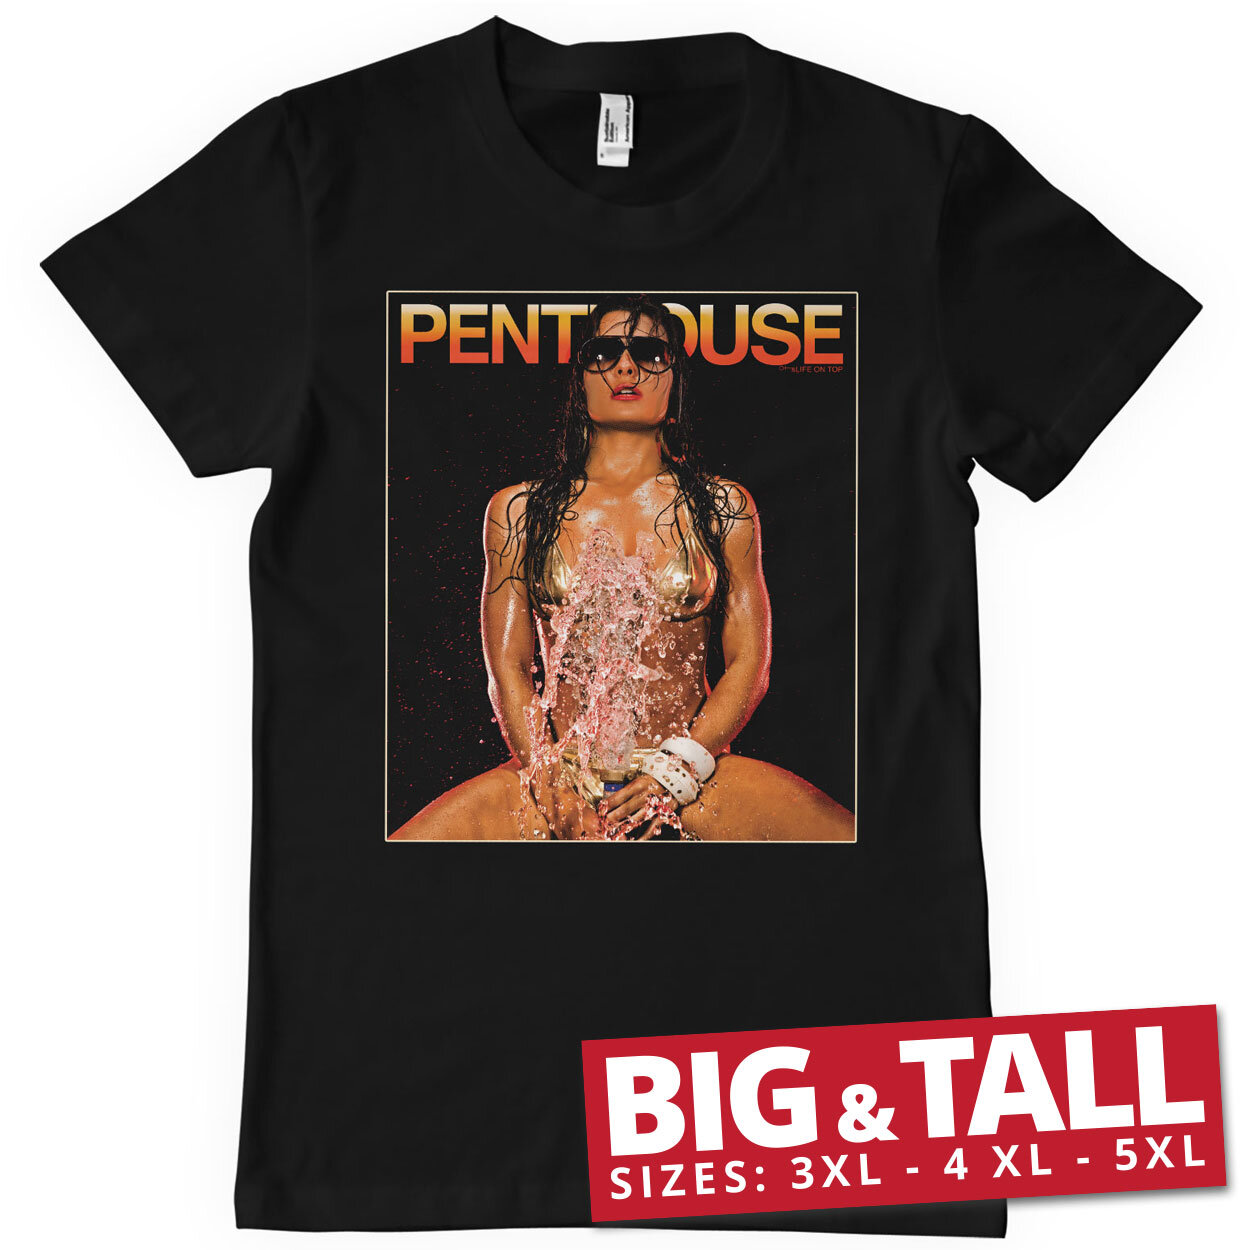 Penthouse August 2007 Cover Big & Tall T-Shirt